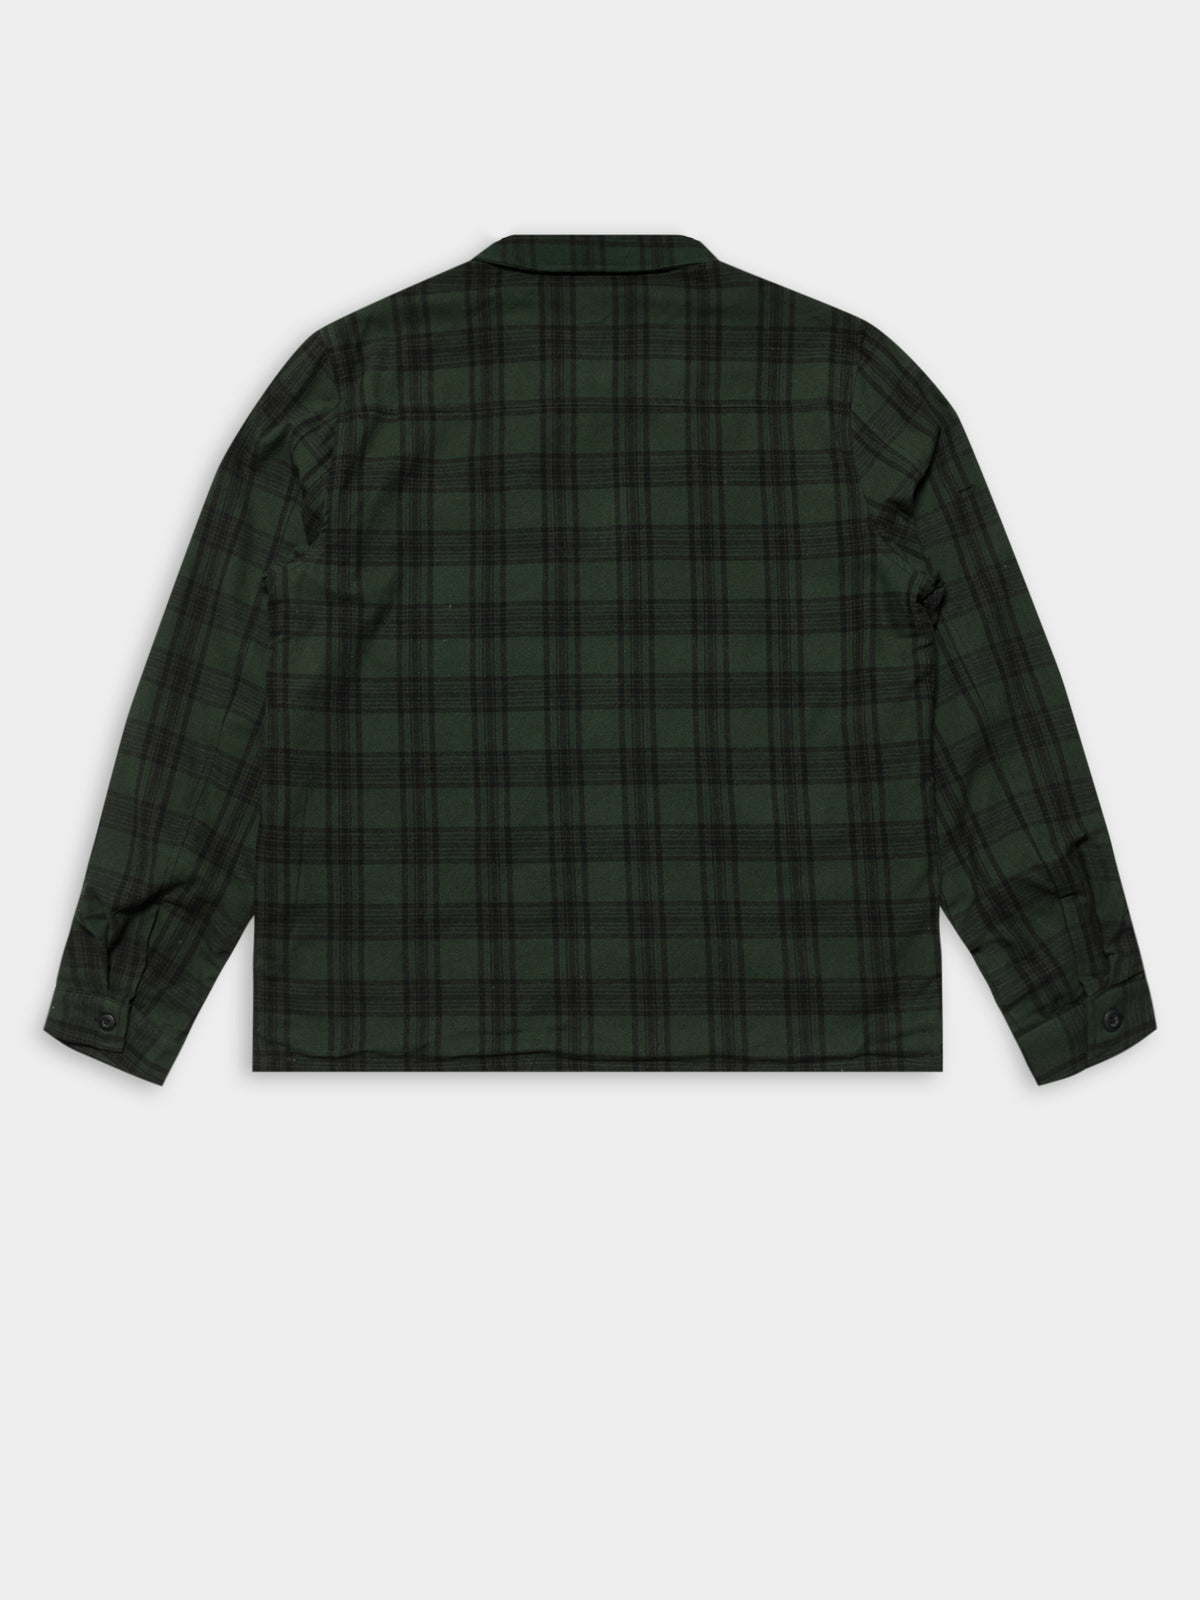 Classic Zip Up Plaid Shirt Jacket in Green